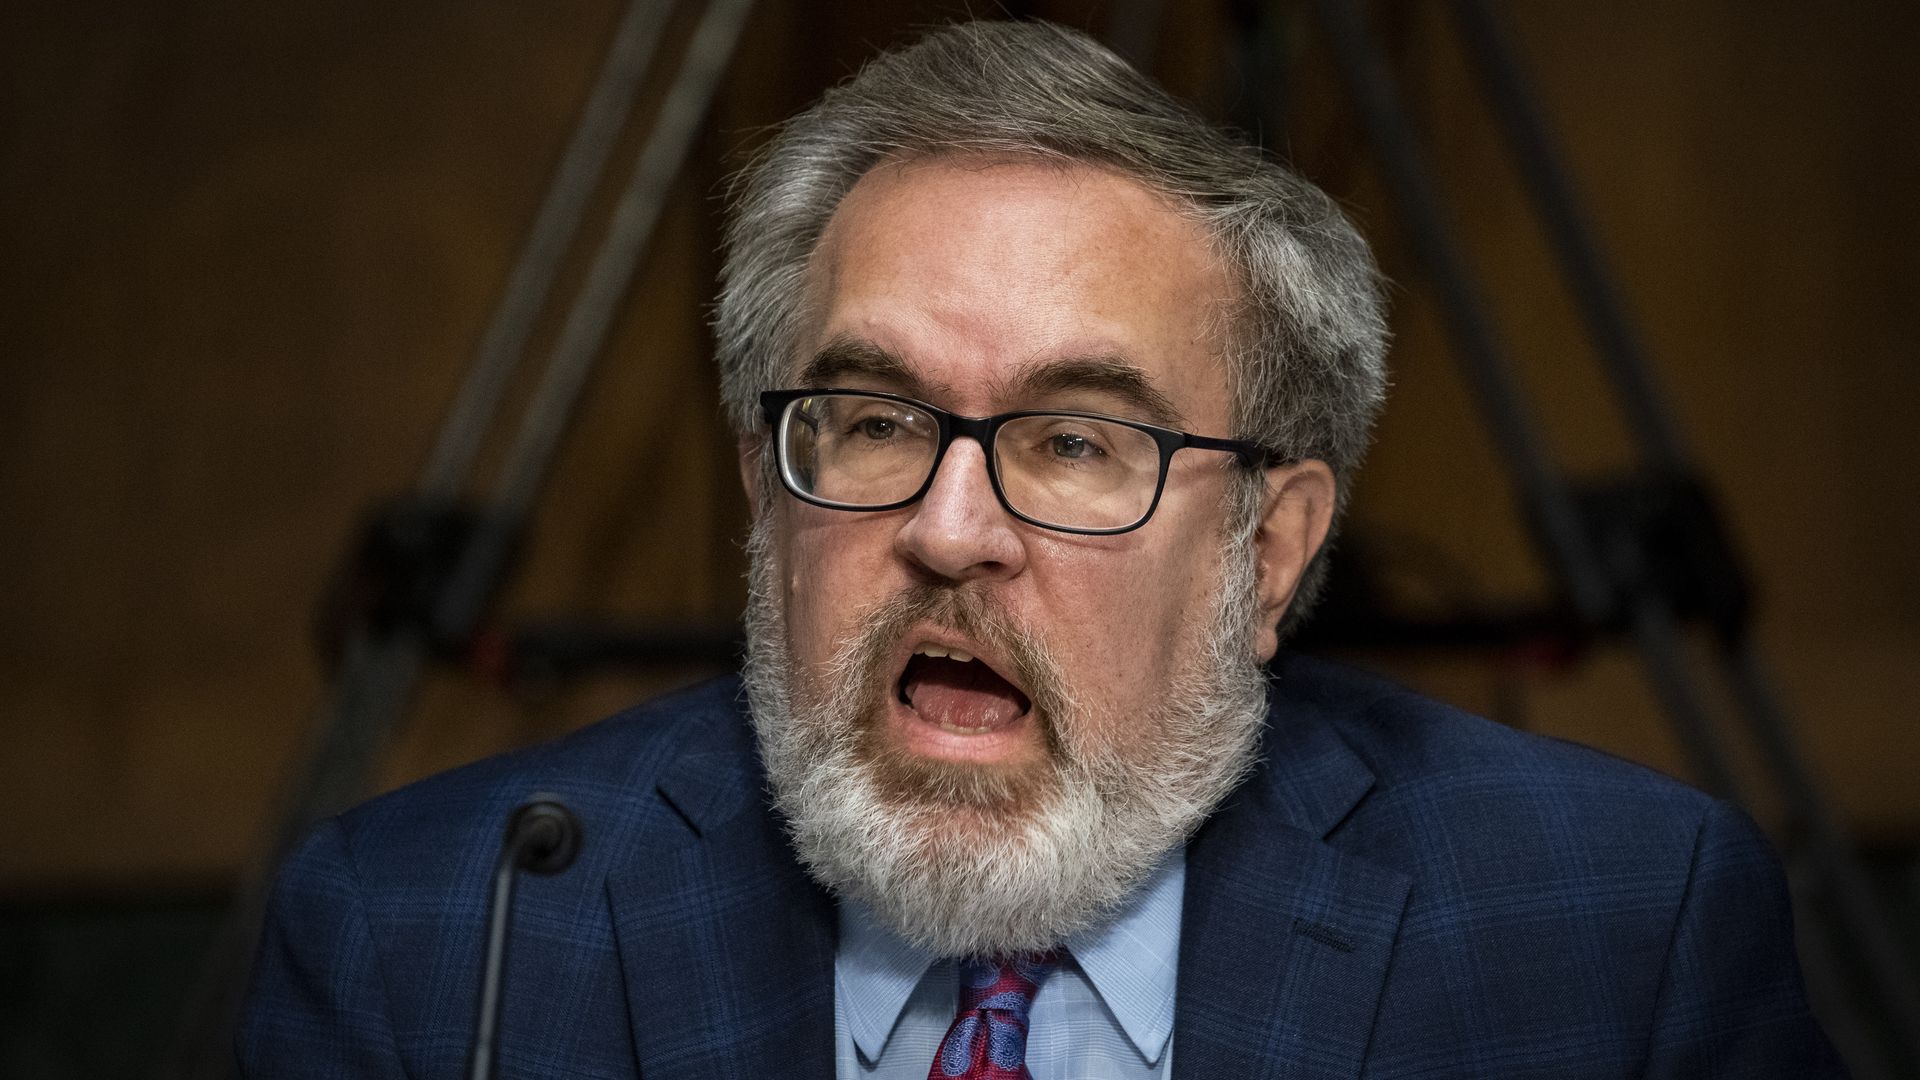 Andrew Wheeler, administrator of the Environmental Protection Agency (EPA), speaks during a Senate Environment and Public Works Committee hearing, May 20, 2020 on Capitol Hill in Washington, D.C. 